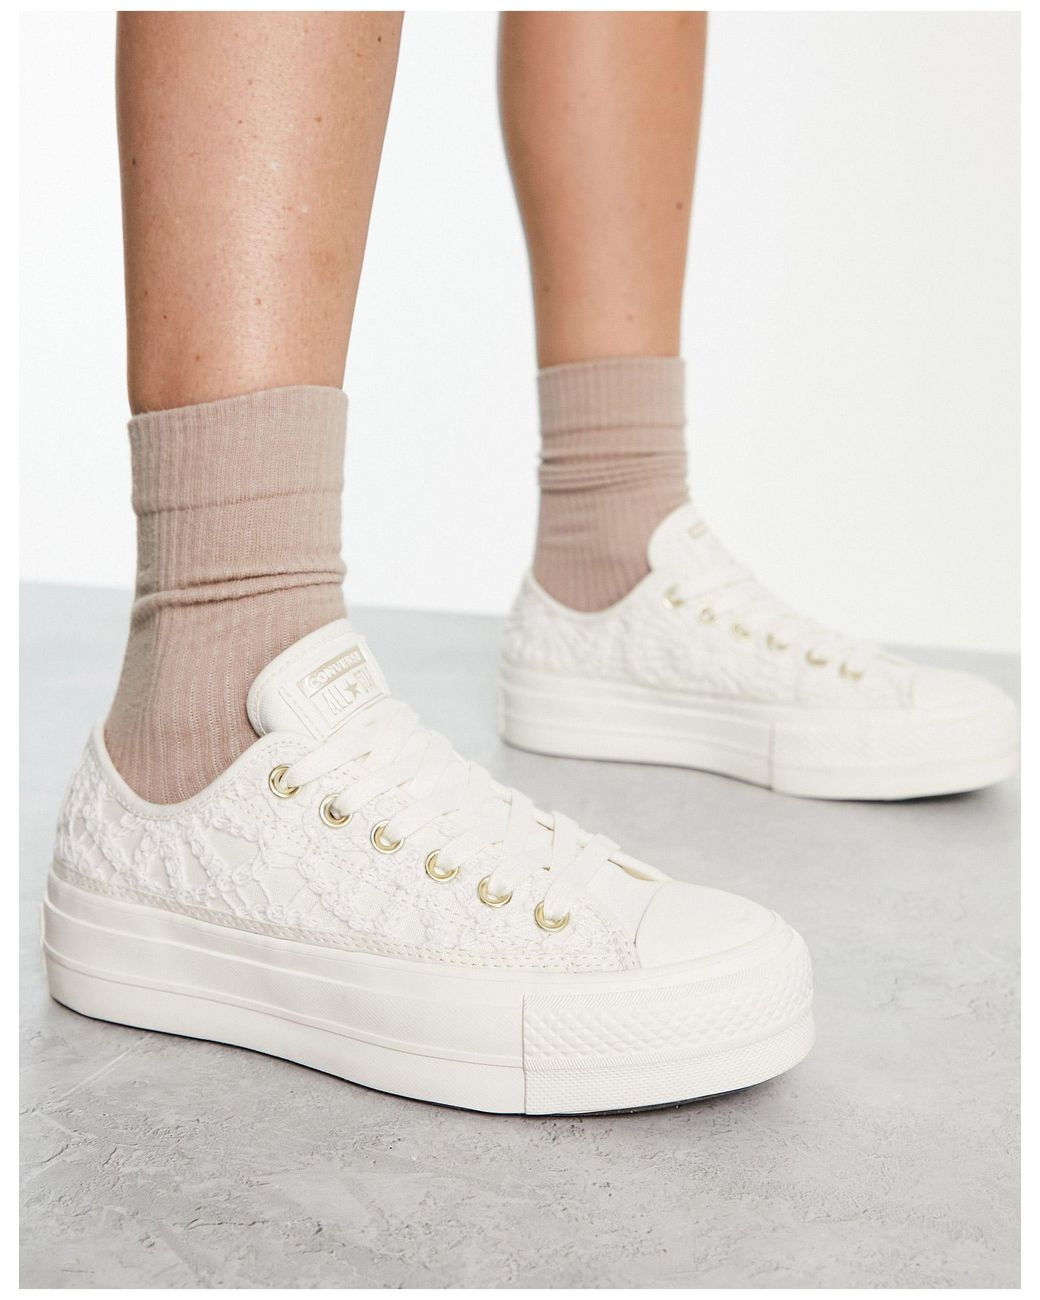 Converse Chuck Taylor All Star Lift Ox Crochet Trainers in White | Lyst  Australia